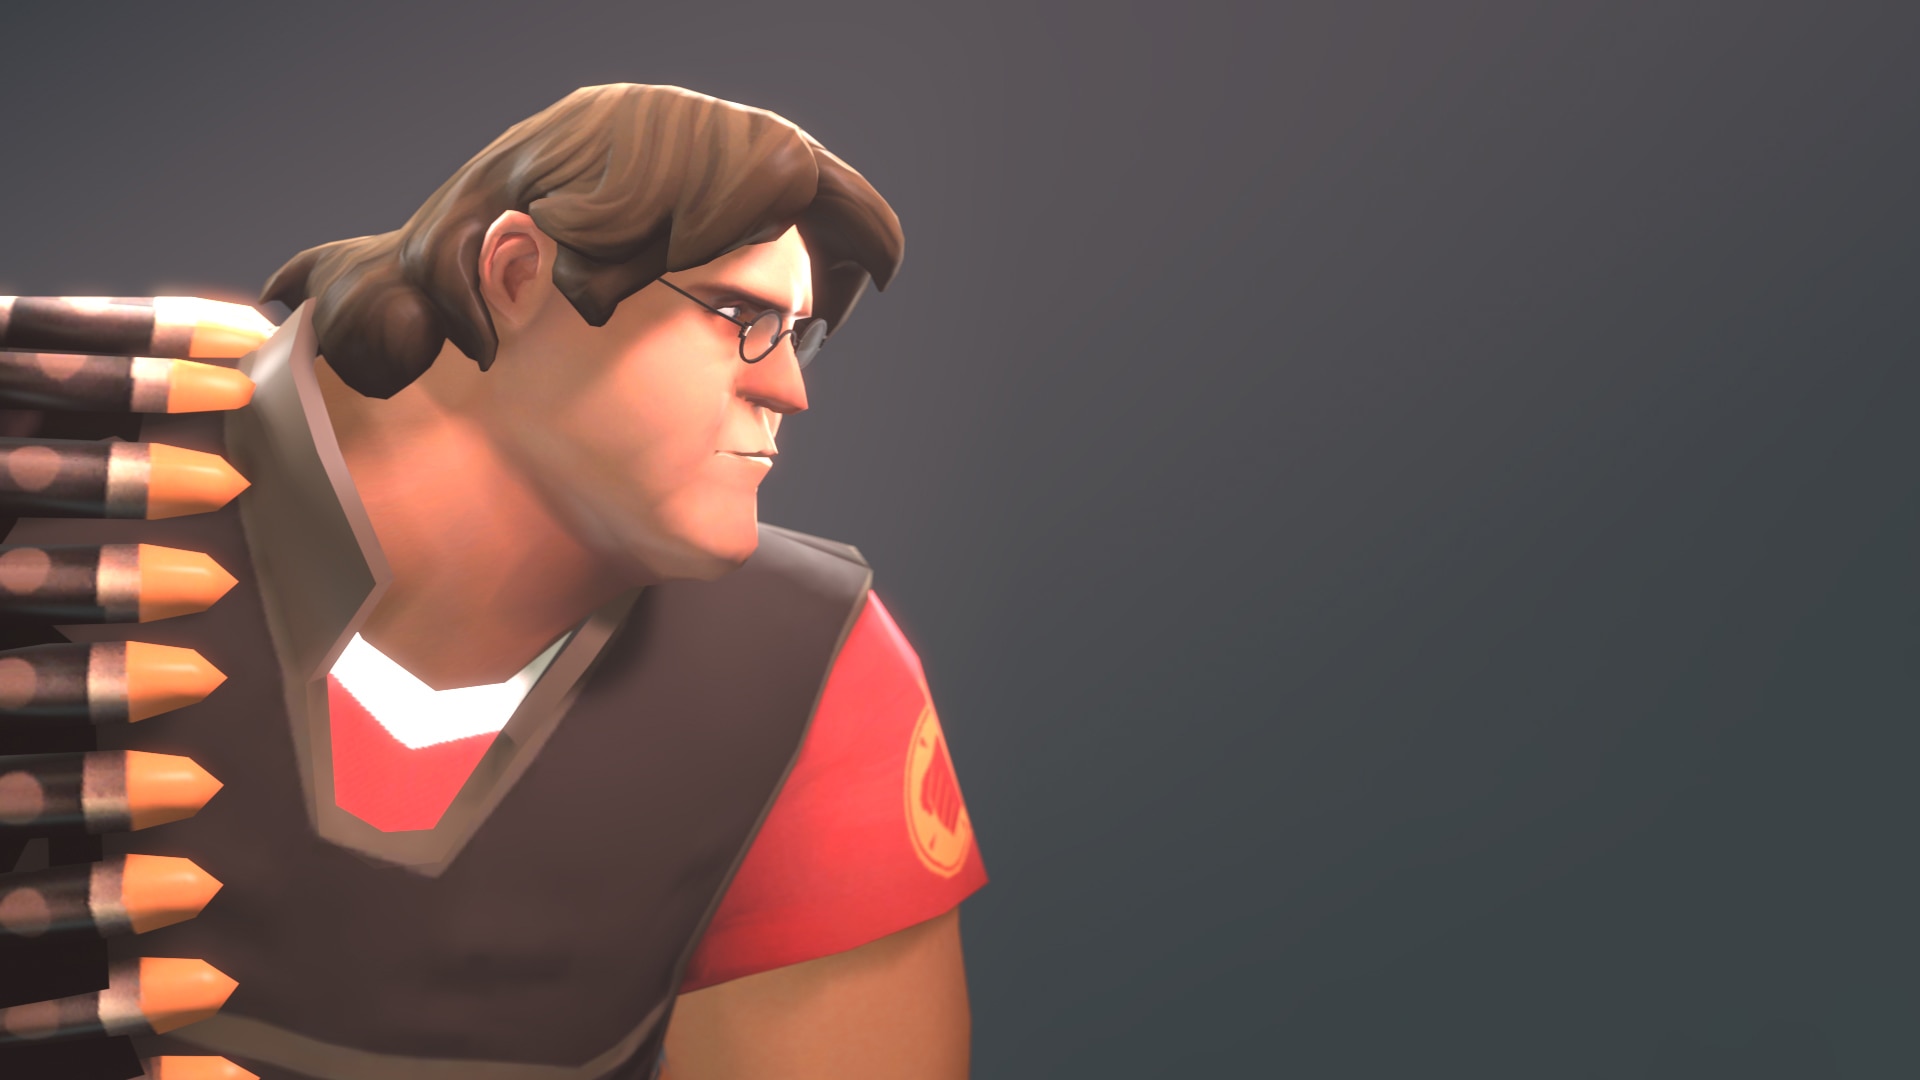 Play as Gabe Newell in Team Fortress 2